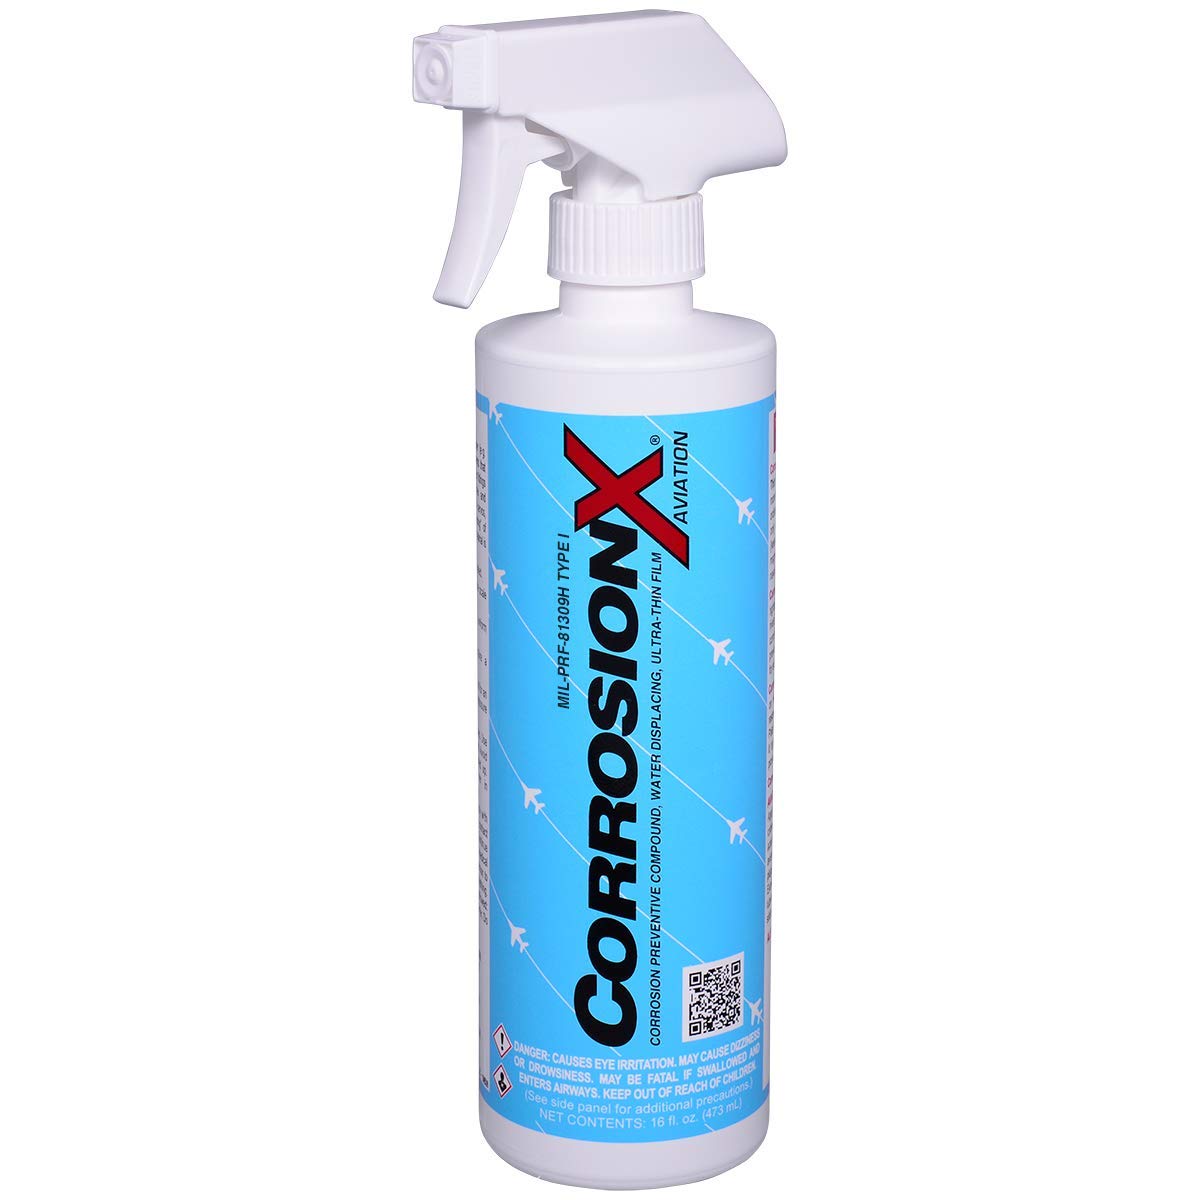 Corrosion Technologies CorrosionX Aviation 80103 (16 oz trigger) – Ultra-Thin Film Aviation Grade, Military Performance Requirement Qualified Corrosion Prevention and Control Compound | MIL-PRF-81309H